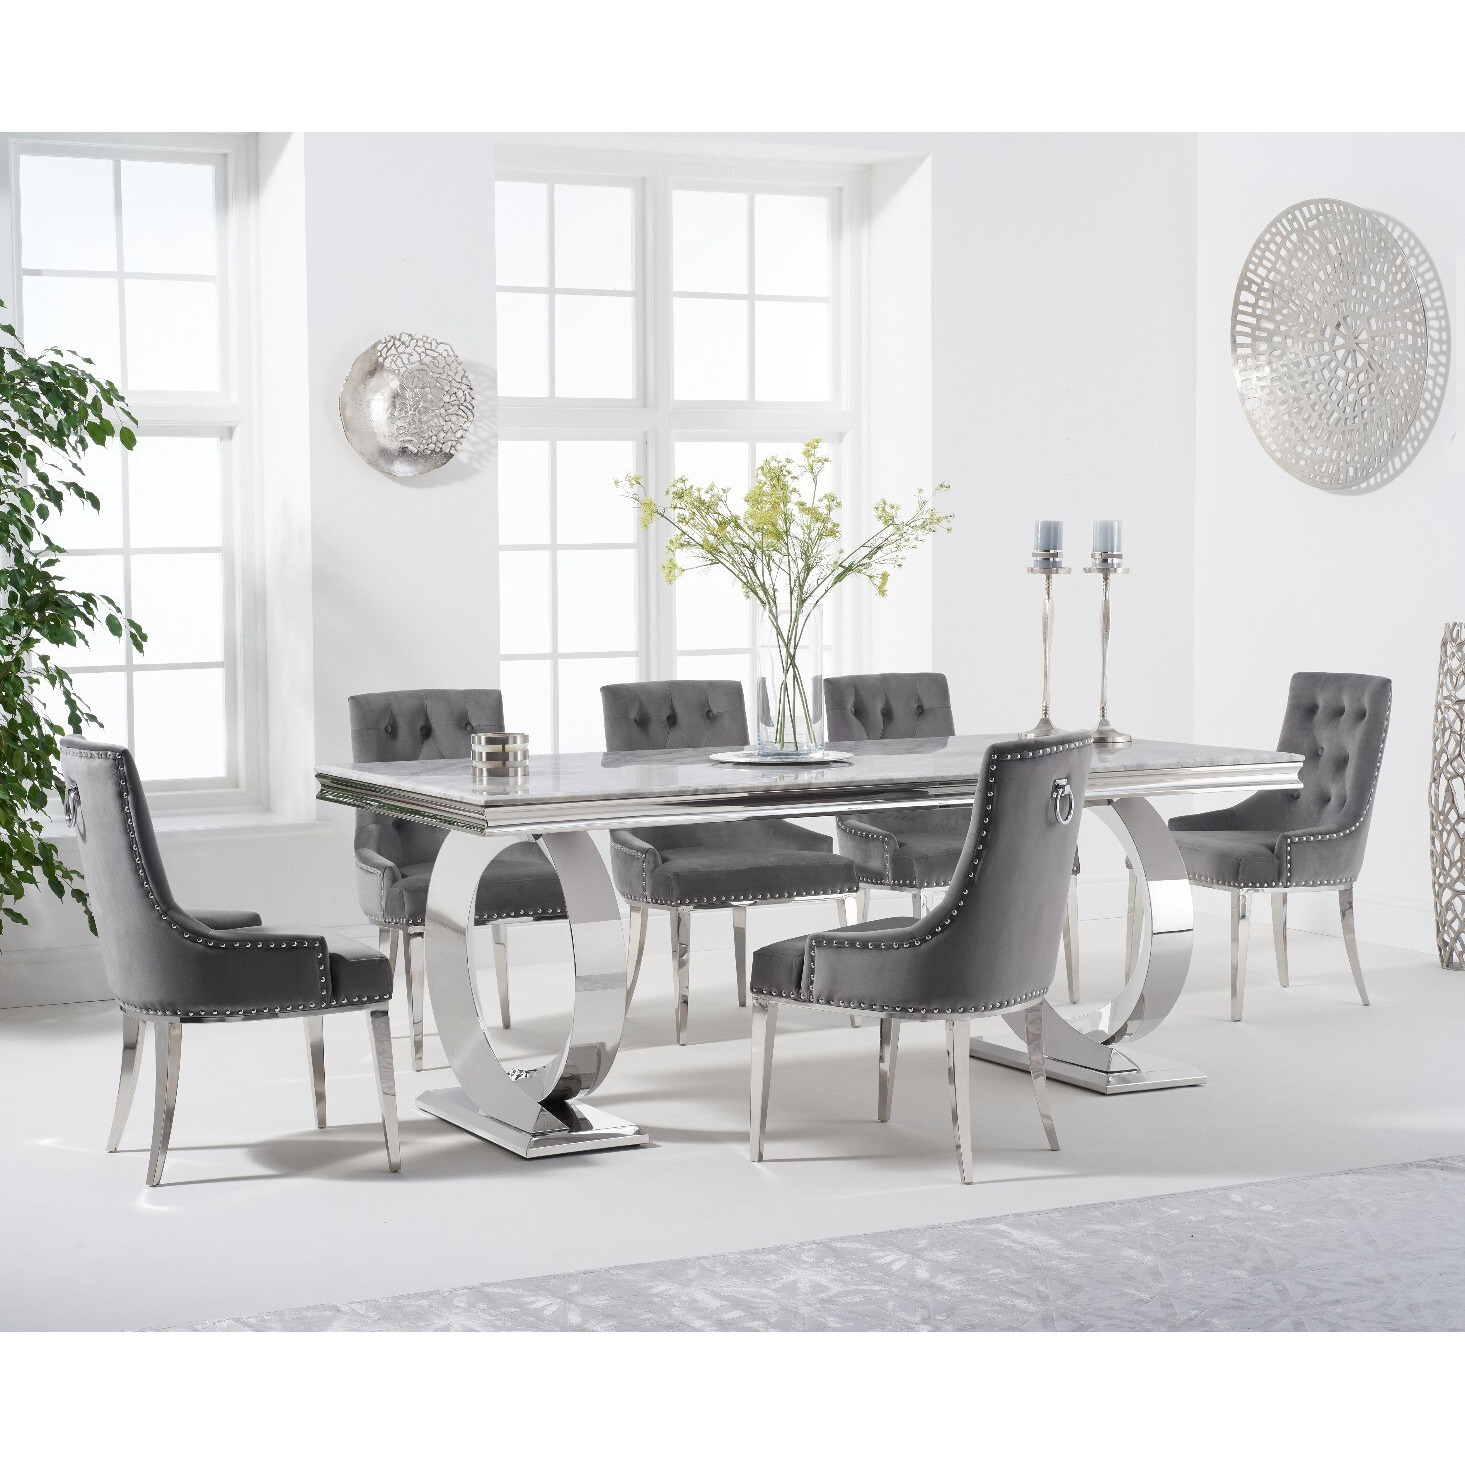 Fabio 200cm Marble Dining Table Sienna Velvet Chairs With 6 Grey